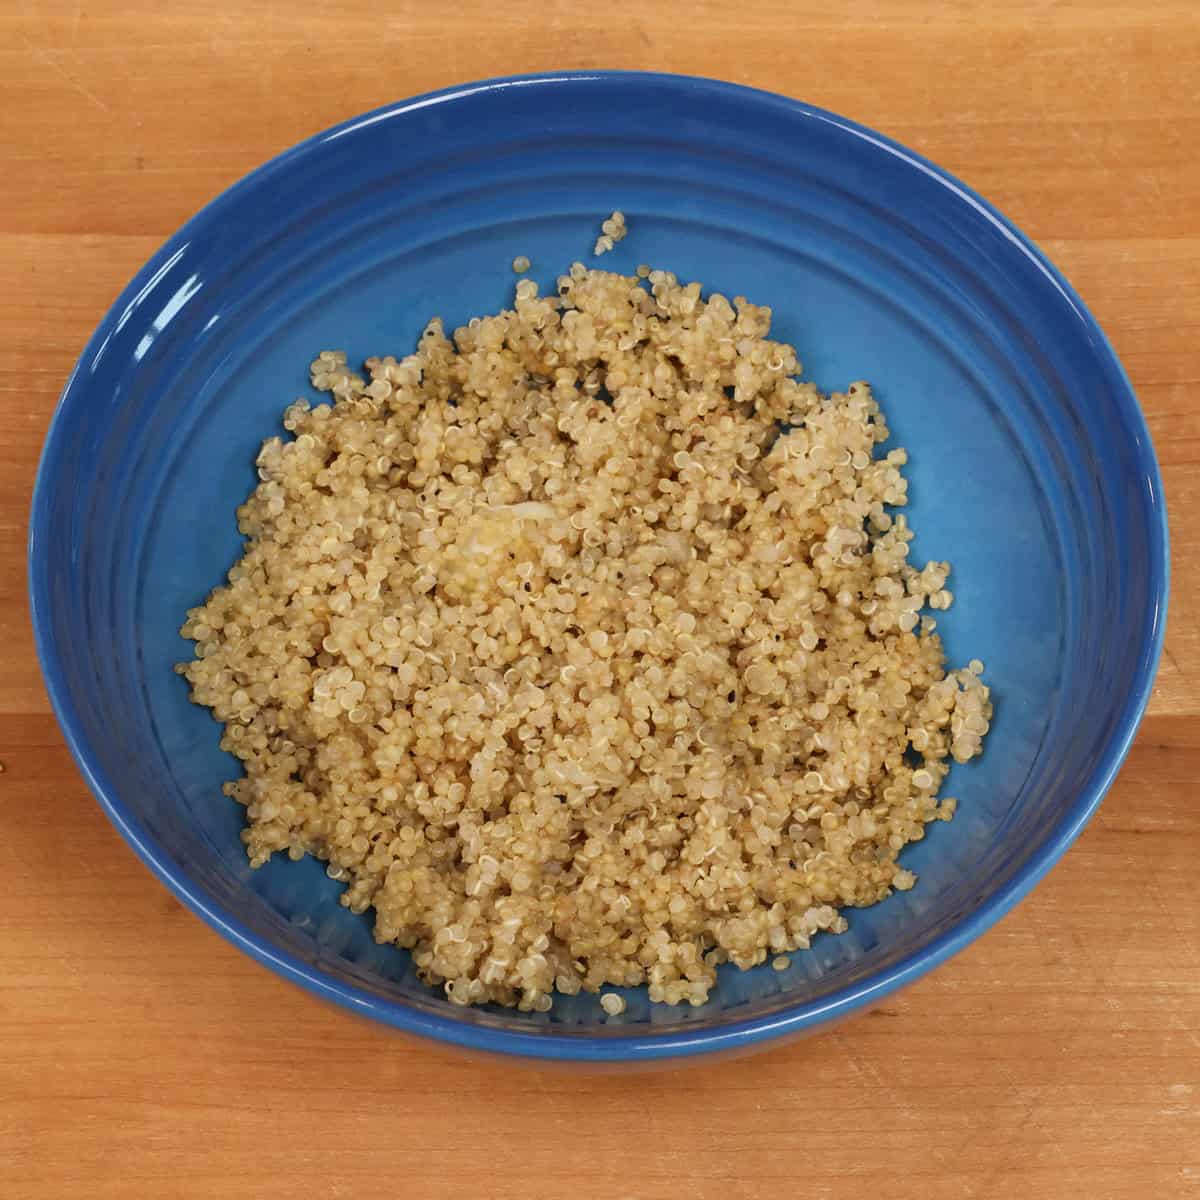 a blue bowl filled with cooked quinoa.